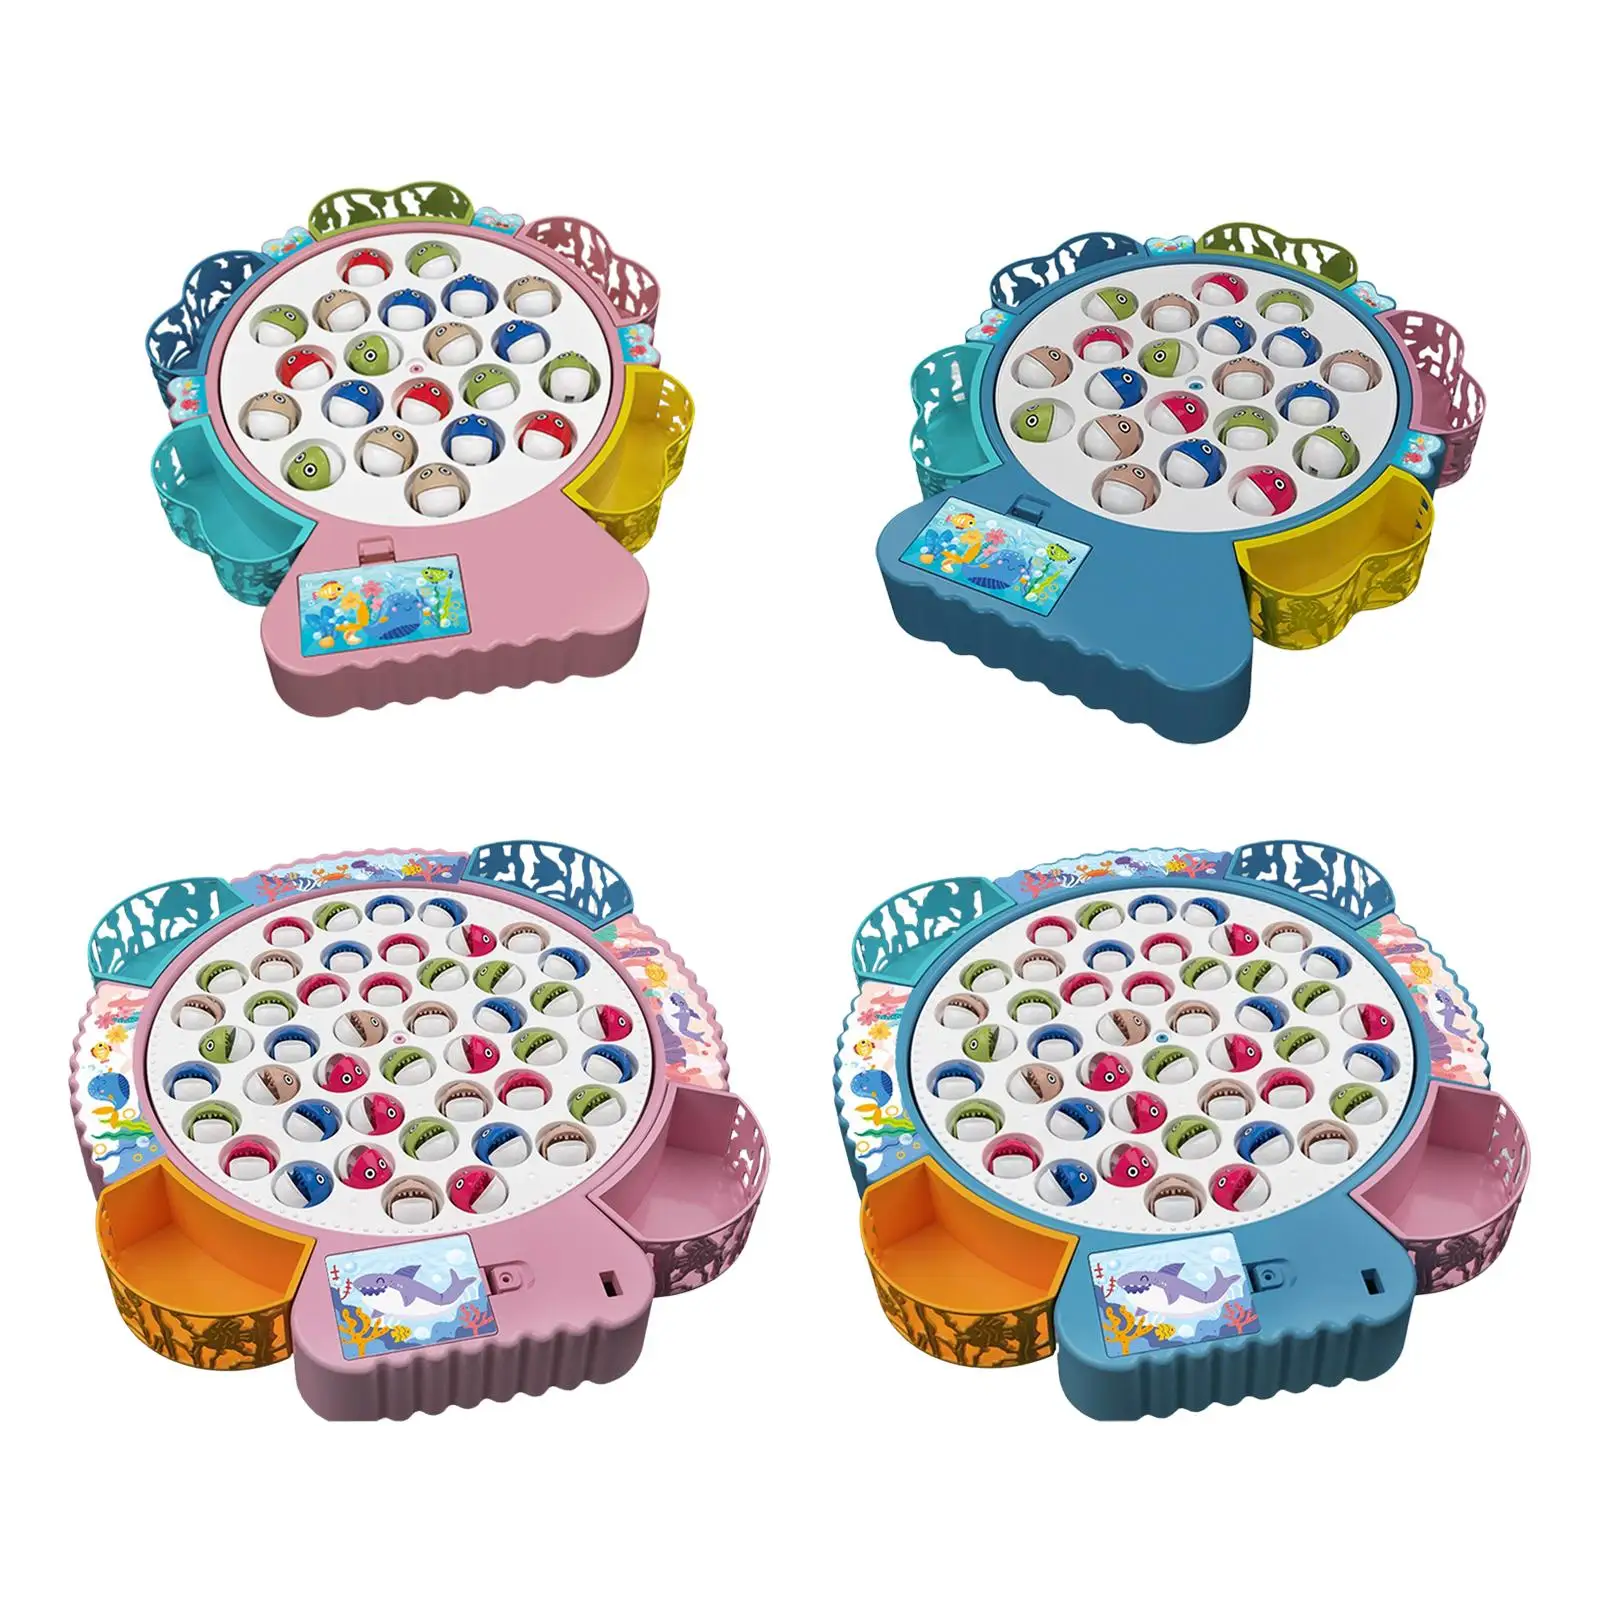 

Rotating Fishing Game Birthday Gifts Colorful Practice Motor Skills Electric Fishing Toy for Preschool Toddlers Age 3 4 5 6 7